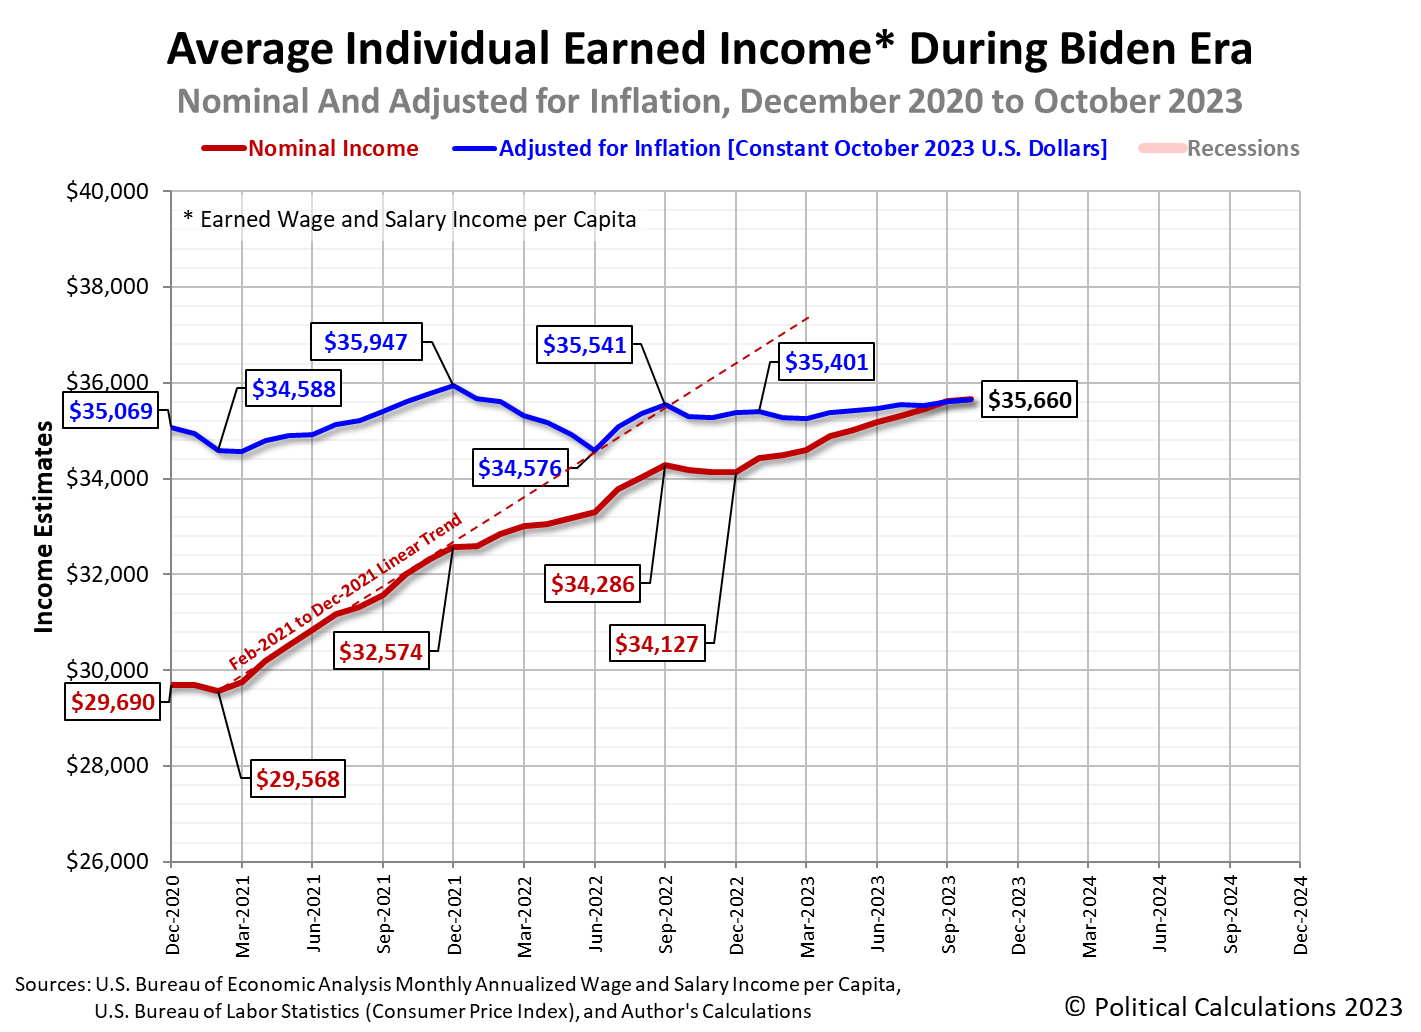 Average Individual Earned Income* During Biden Era, December 2020 to October 2023